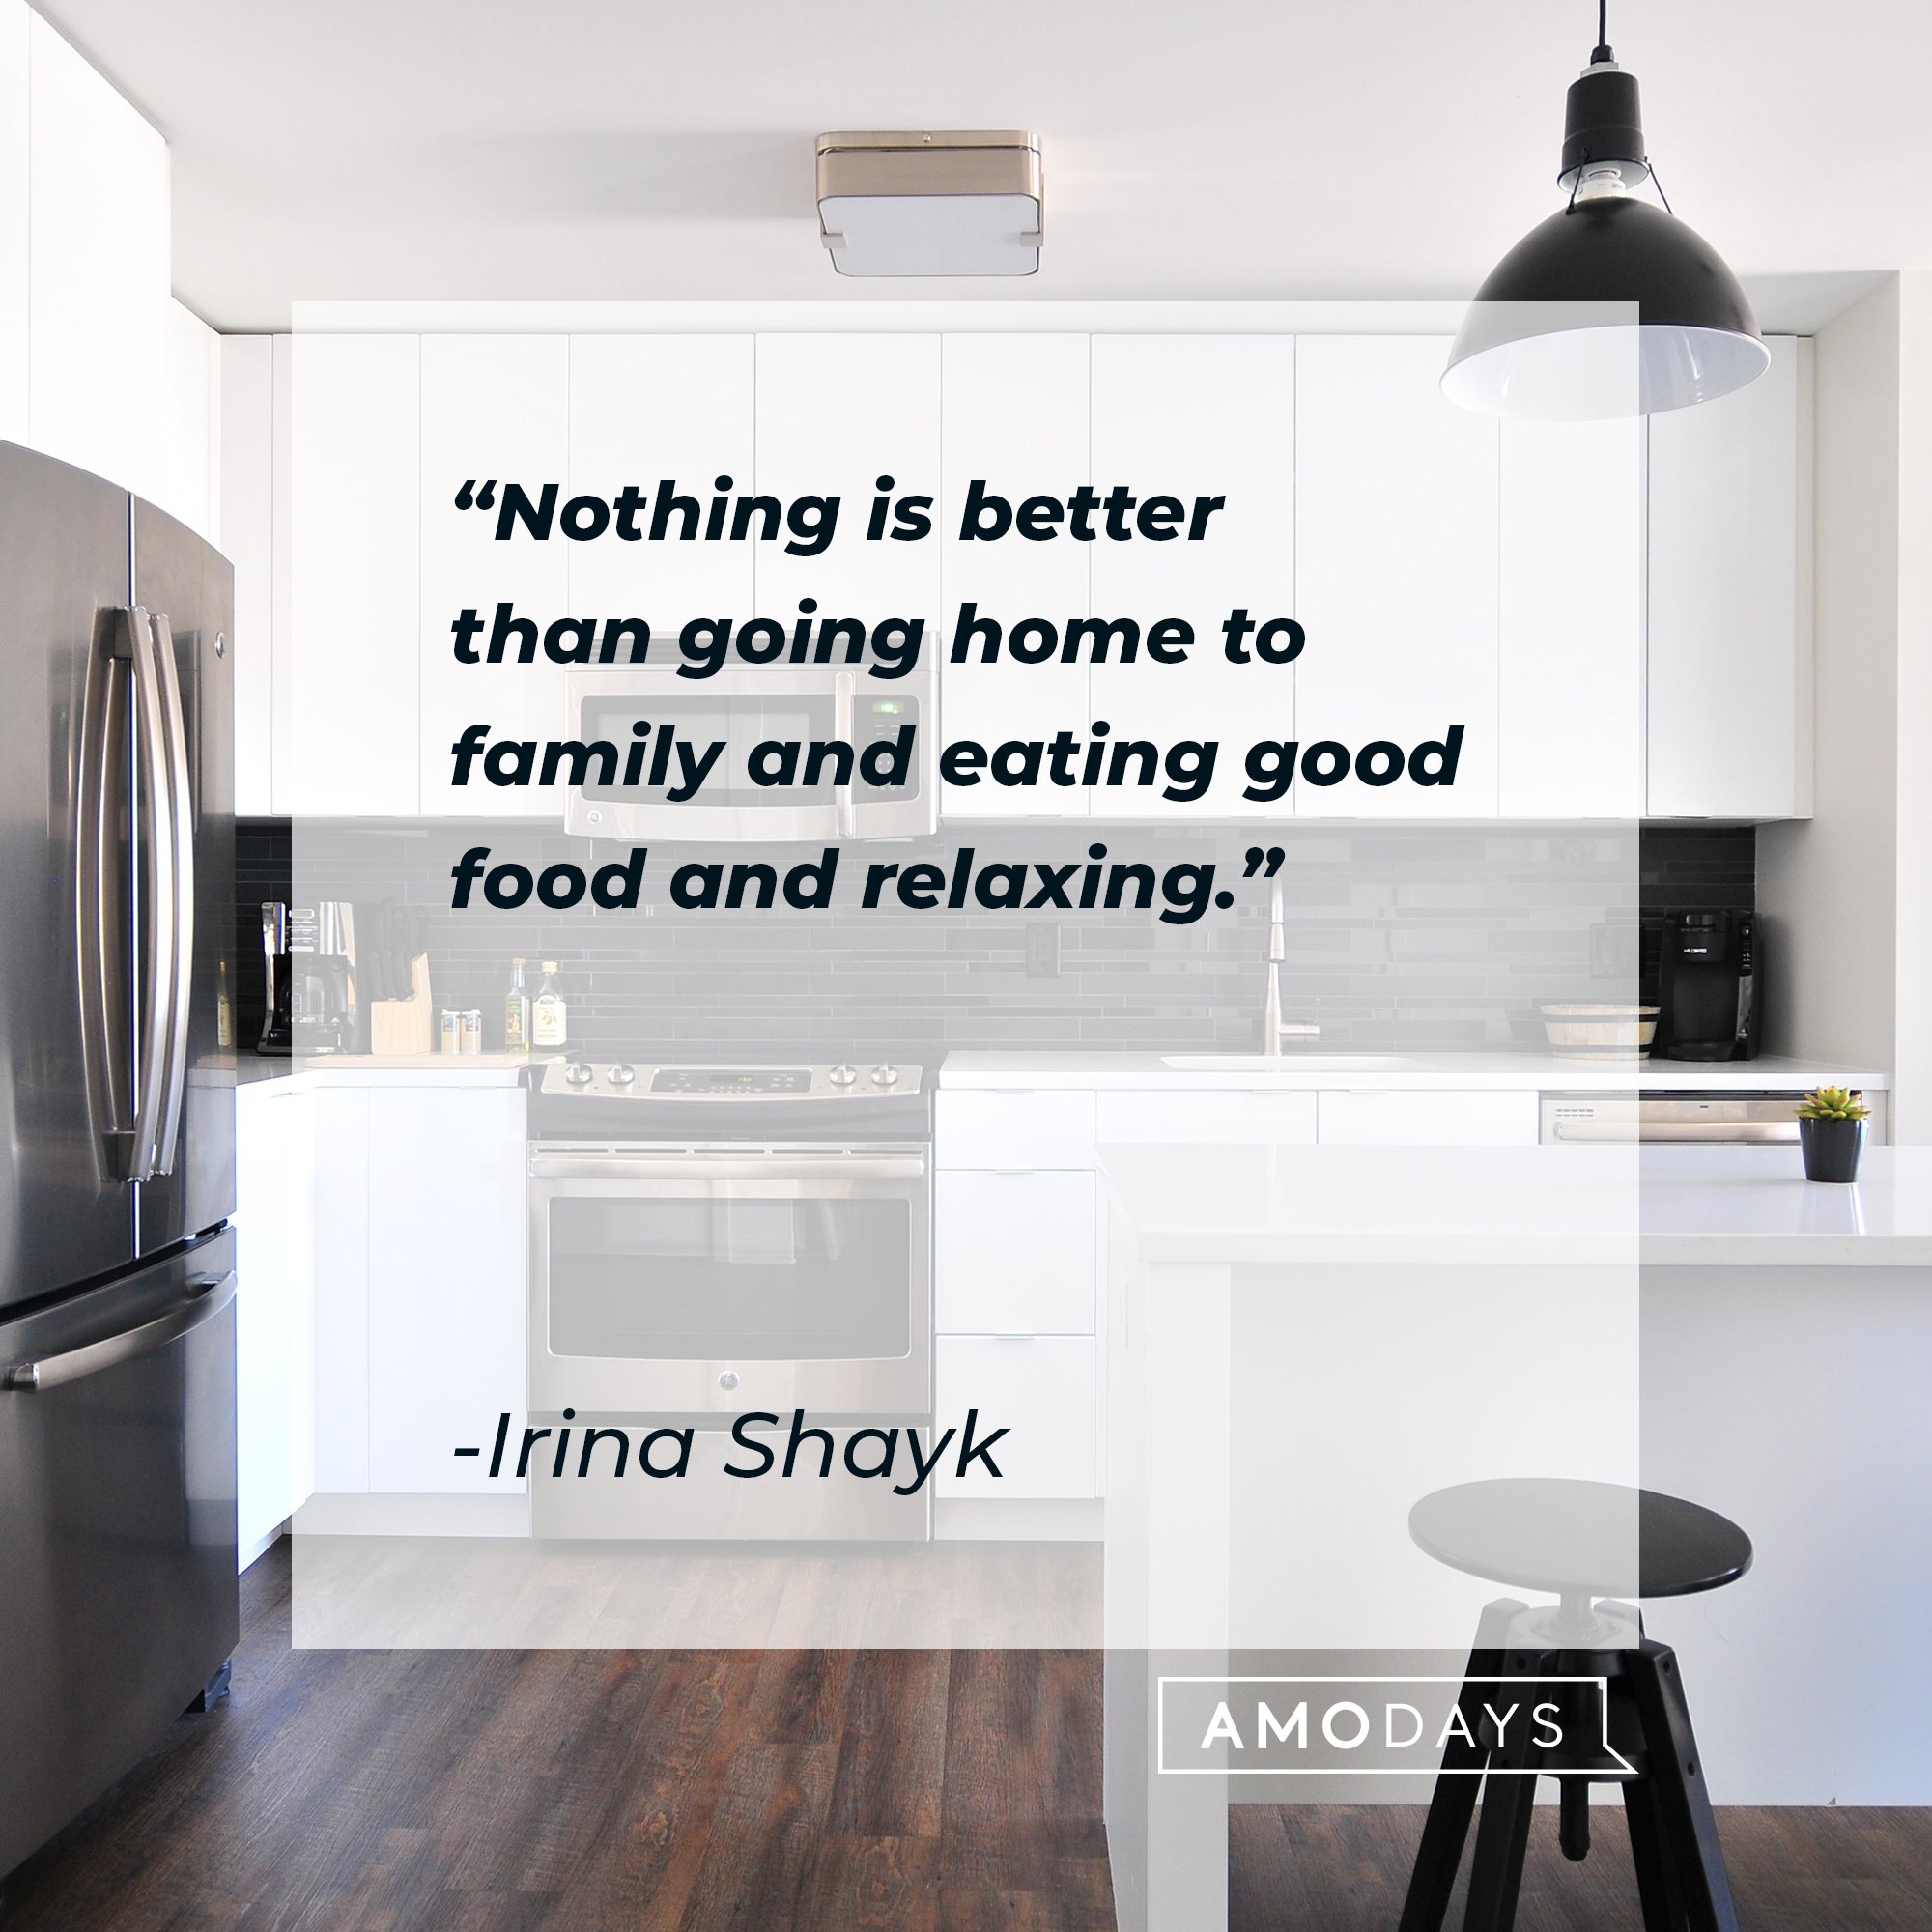 Irina Shayk's quote: "Nothing is better than going home to family and eating good food and relaxing." | Image: AmoDays